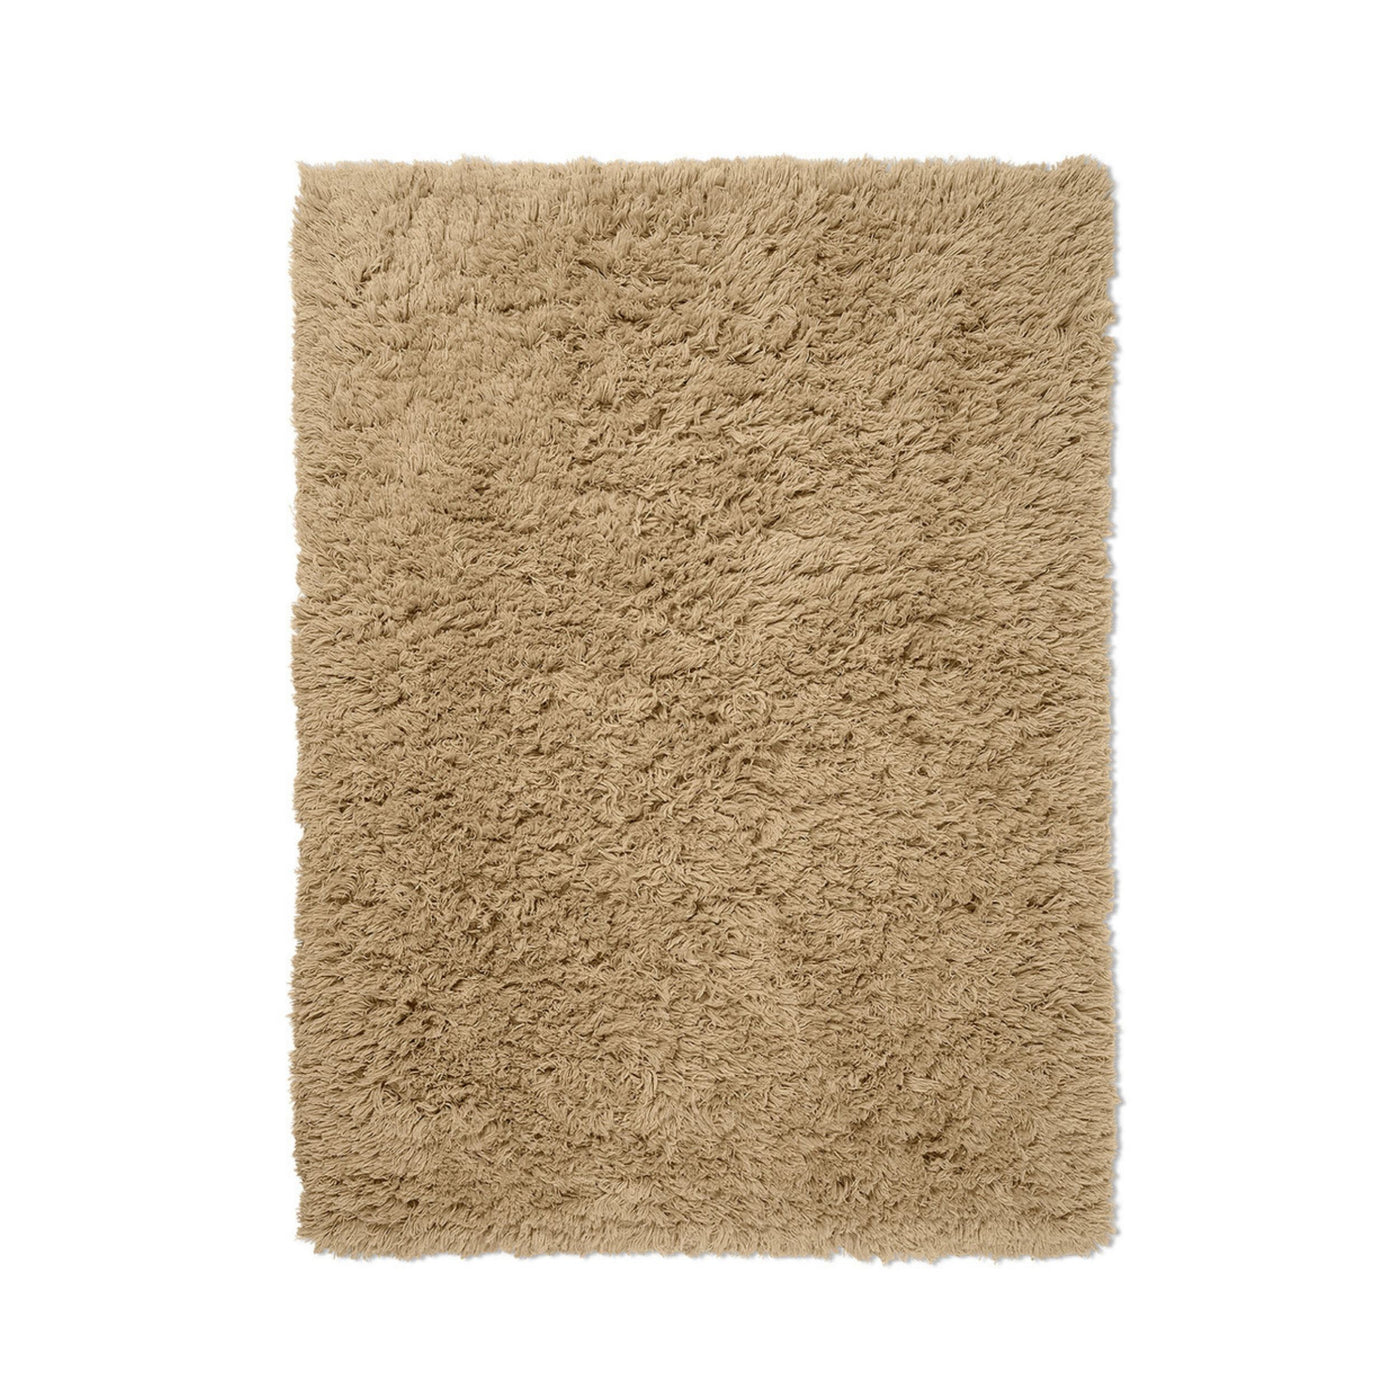 Ferm Living Meadow High Pile rug in light sand, large size. Shop online at someday designs. #colour_light-sand